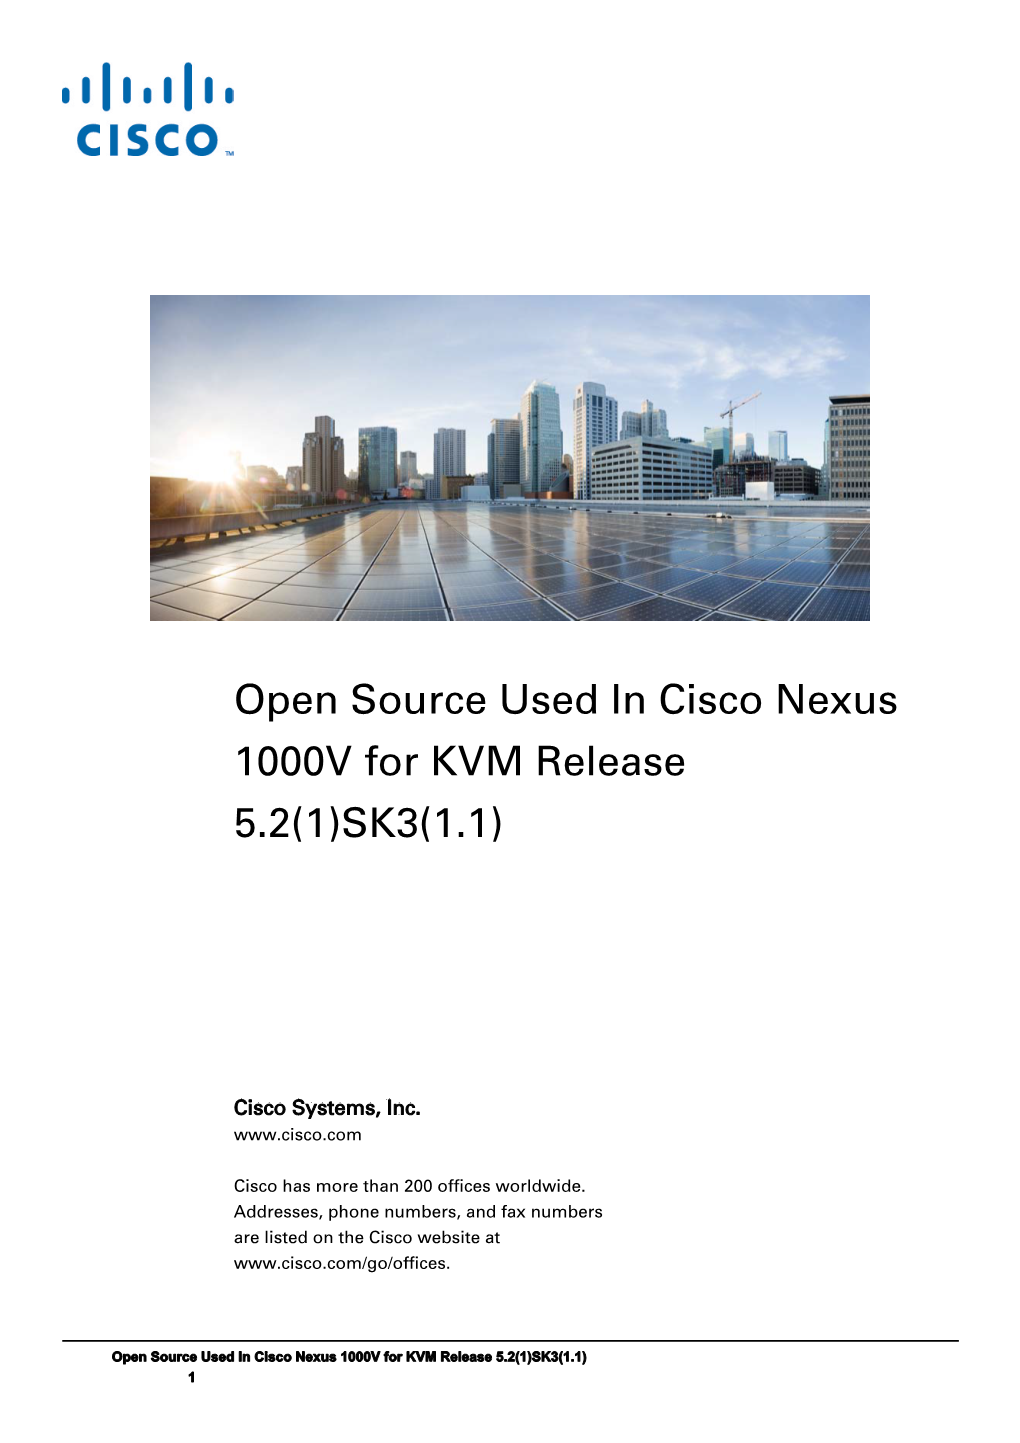 Licensing and Copyright Information for Cisco Nexus NX-OS Software